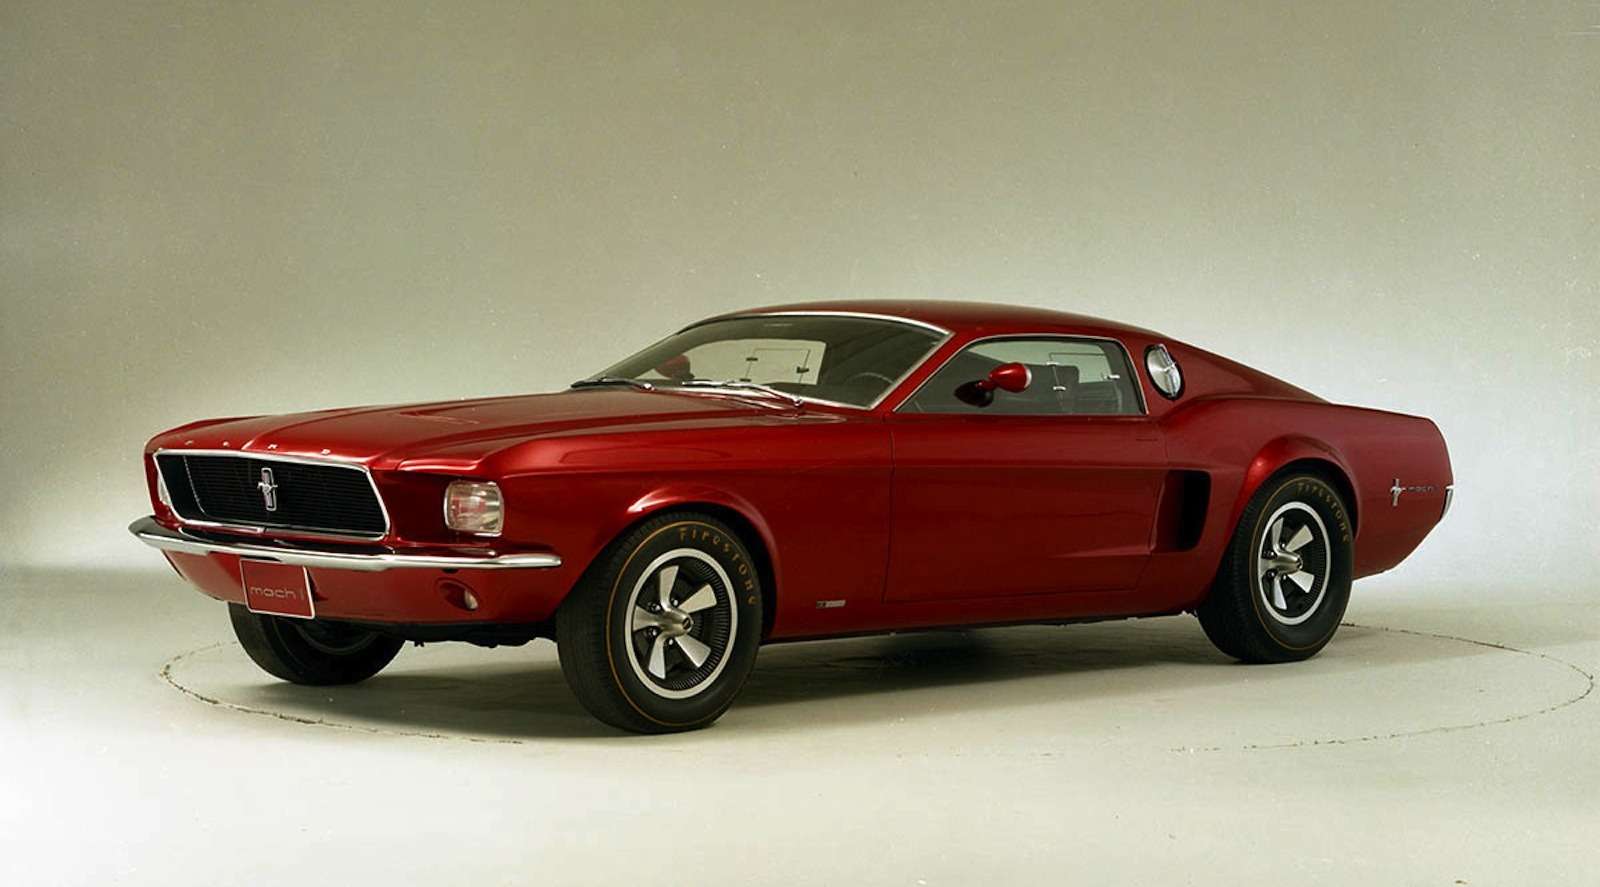 Ford Mustangs That Never Were: 1966 Mach 1 concept